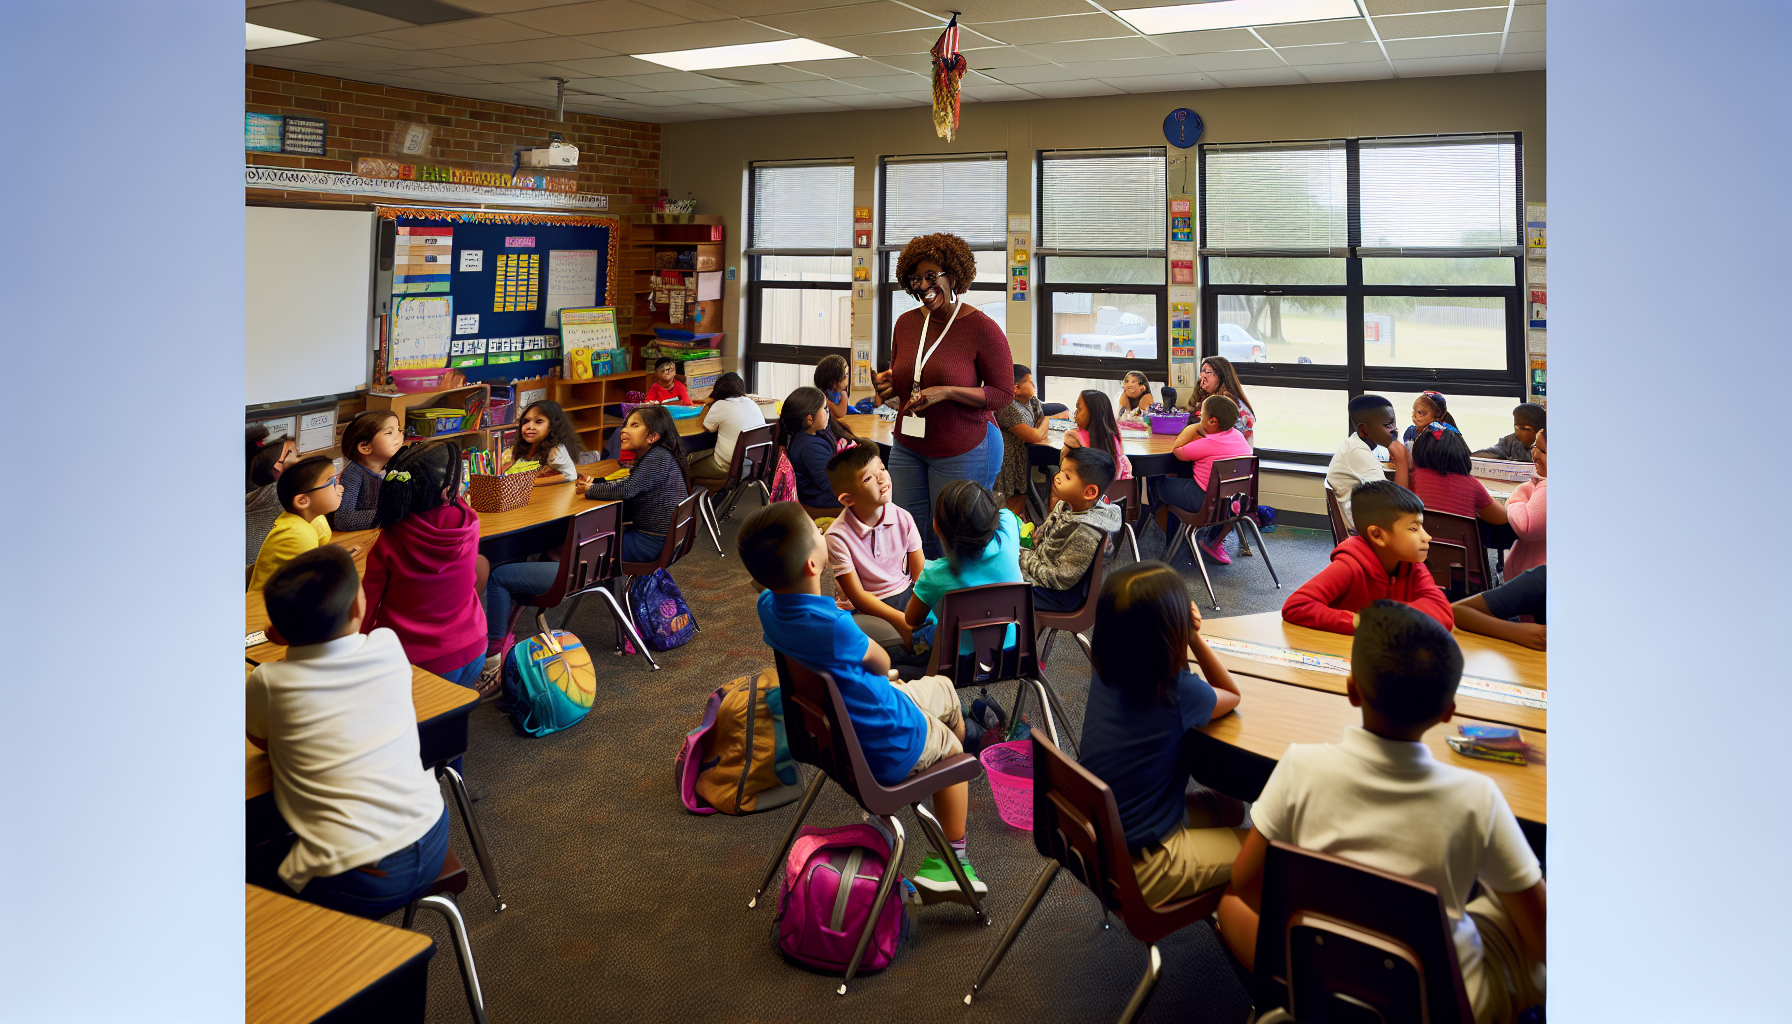 Elementary school classroom in Hutto ISD